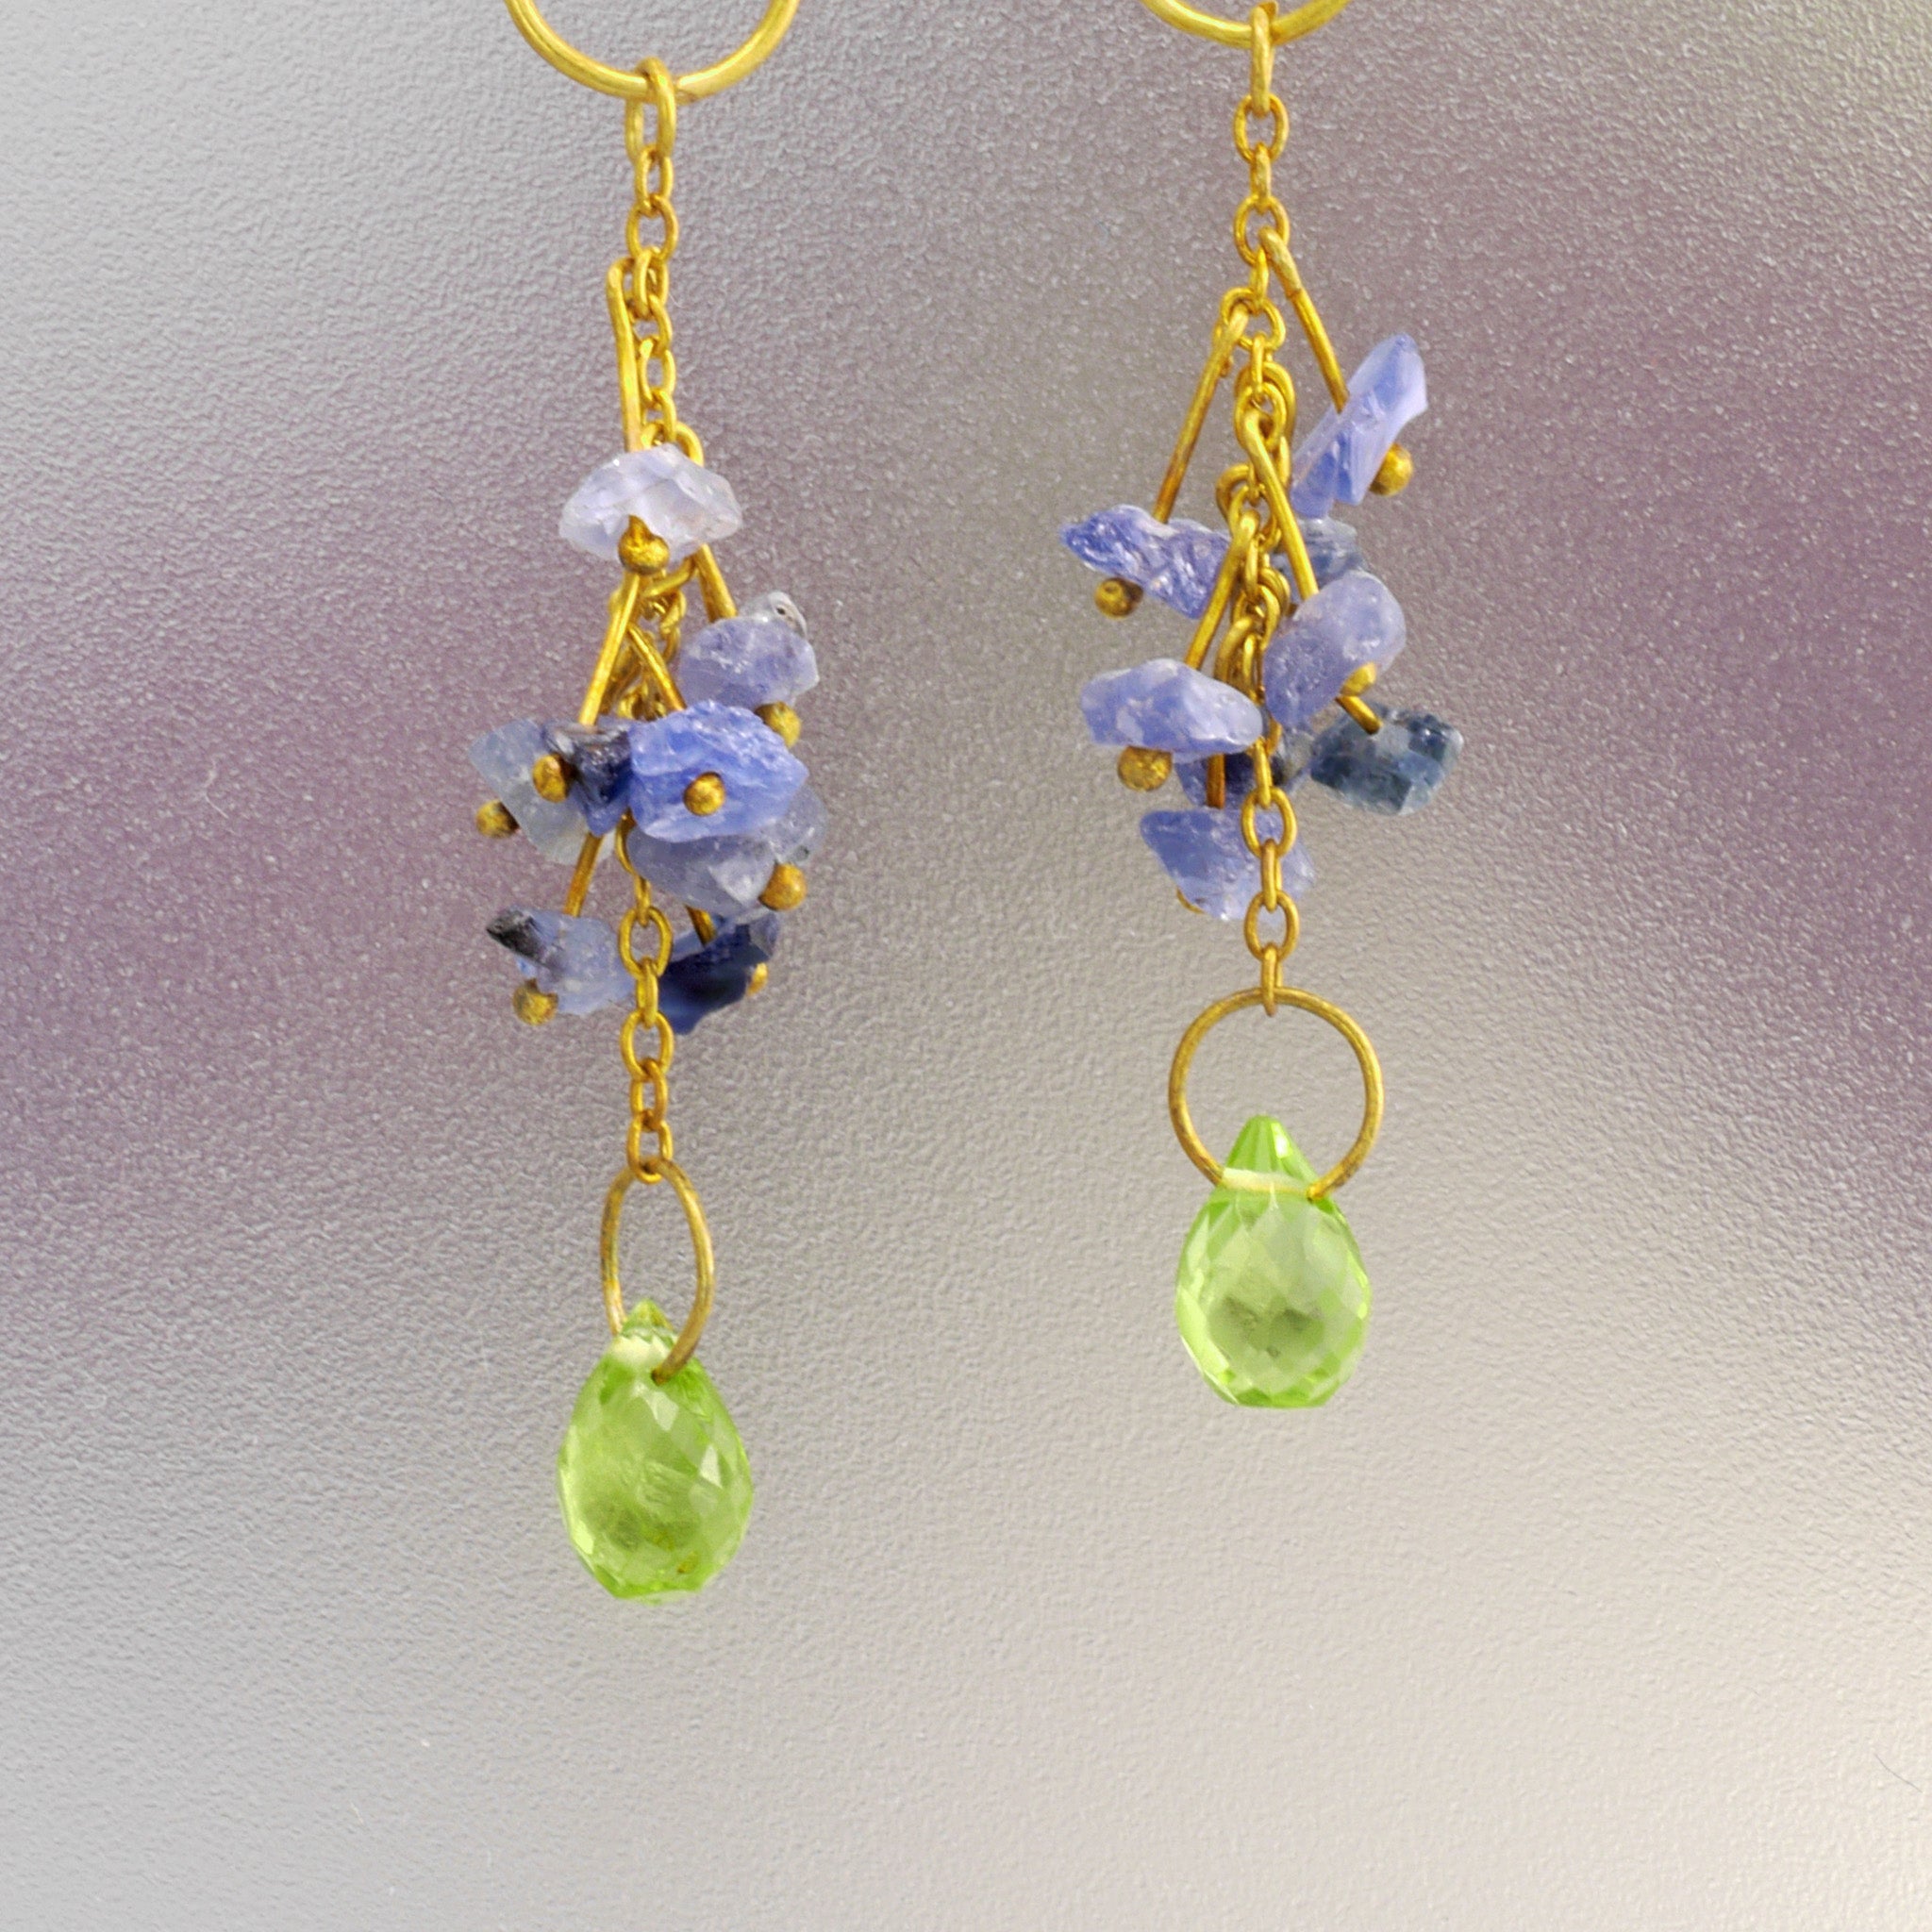 Details of 18k Yellow Gold earrings adorned with raw blue sapphires and a dangling Peridot drop.